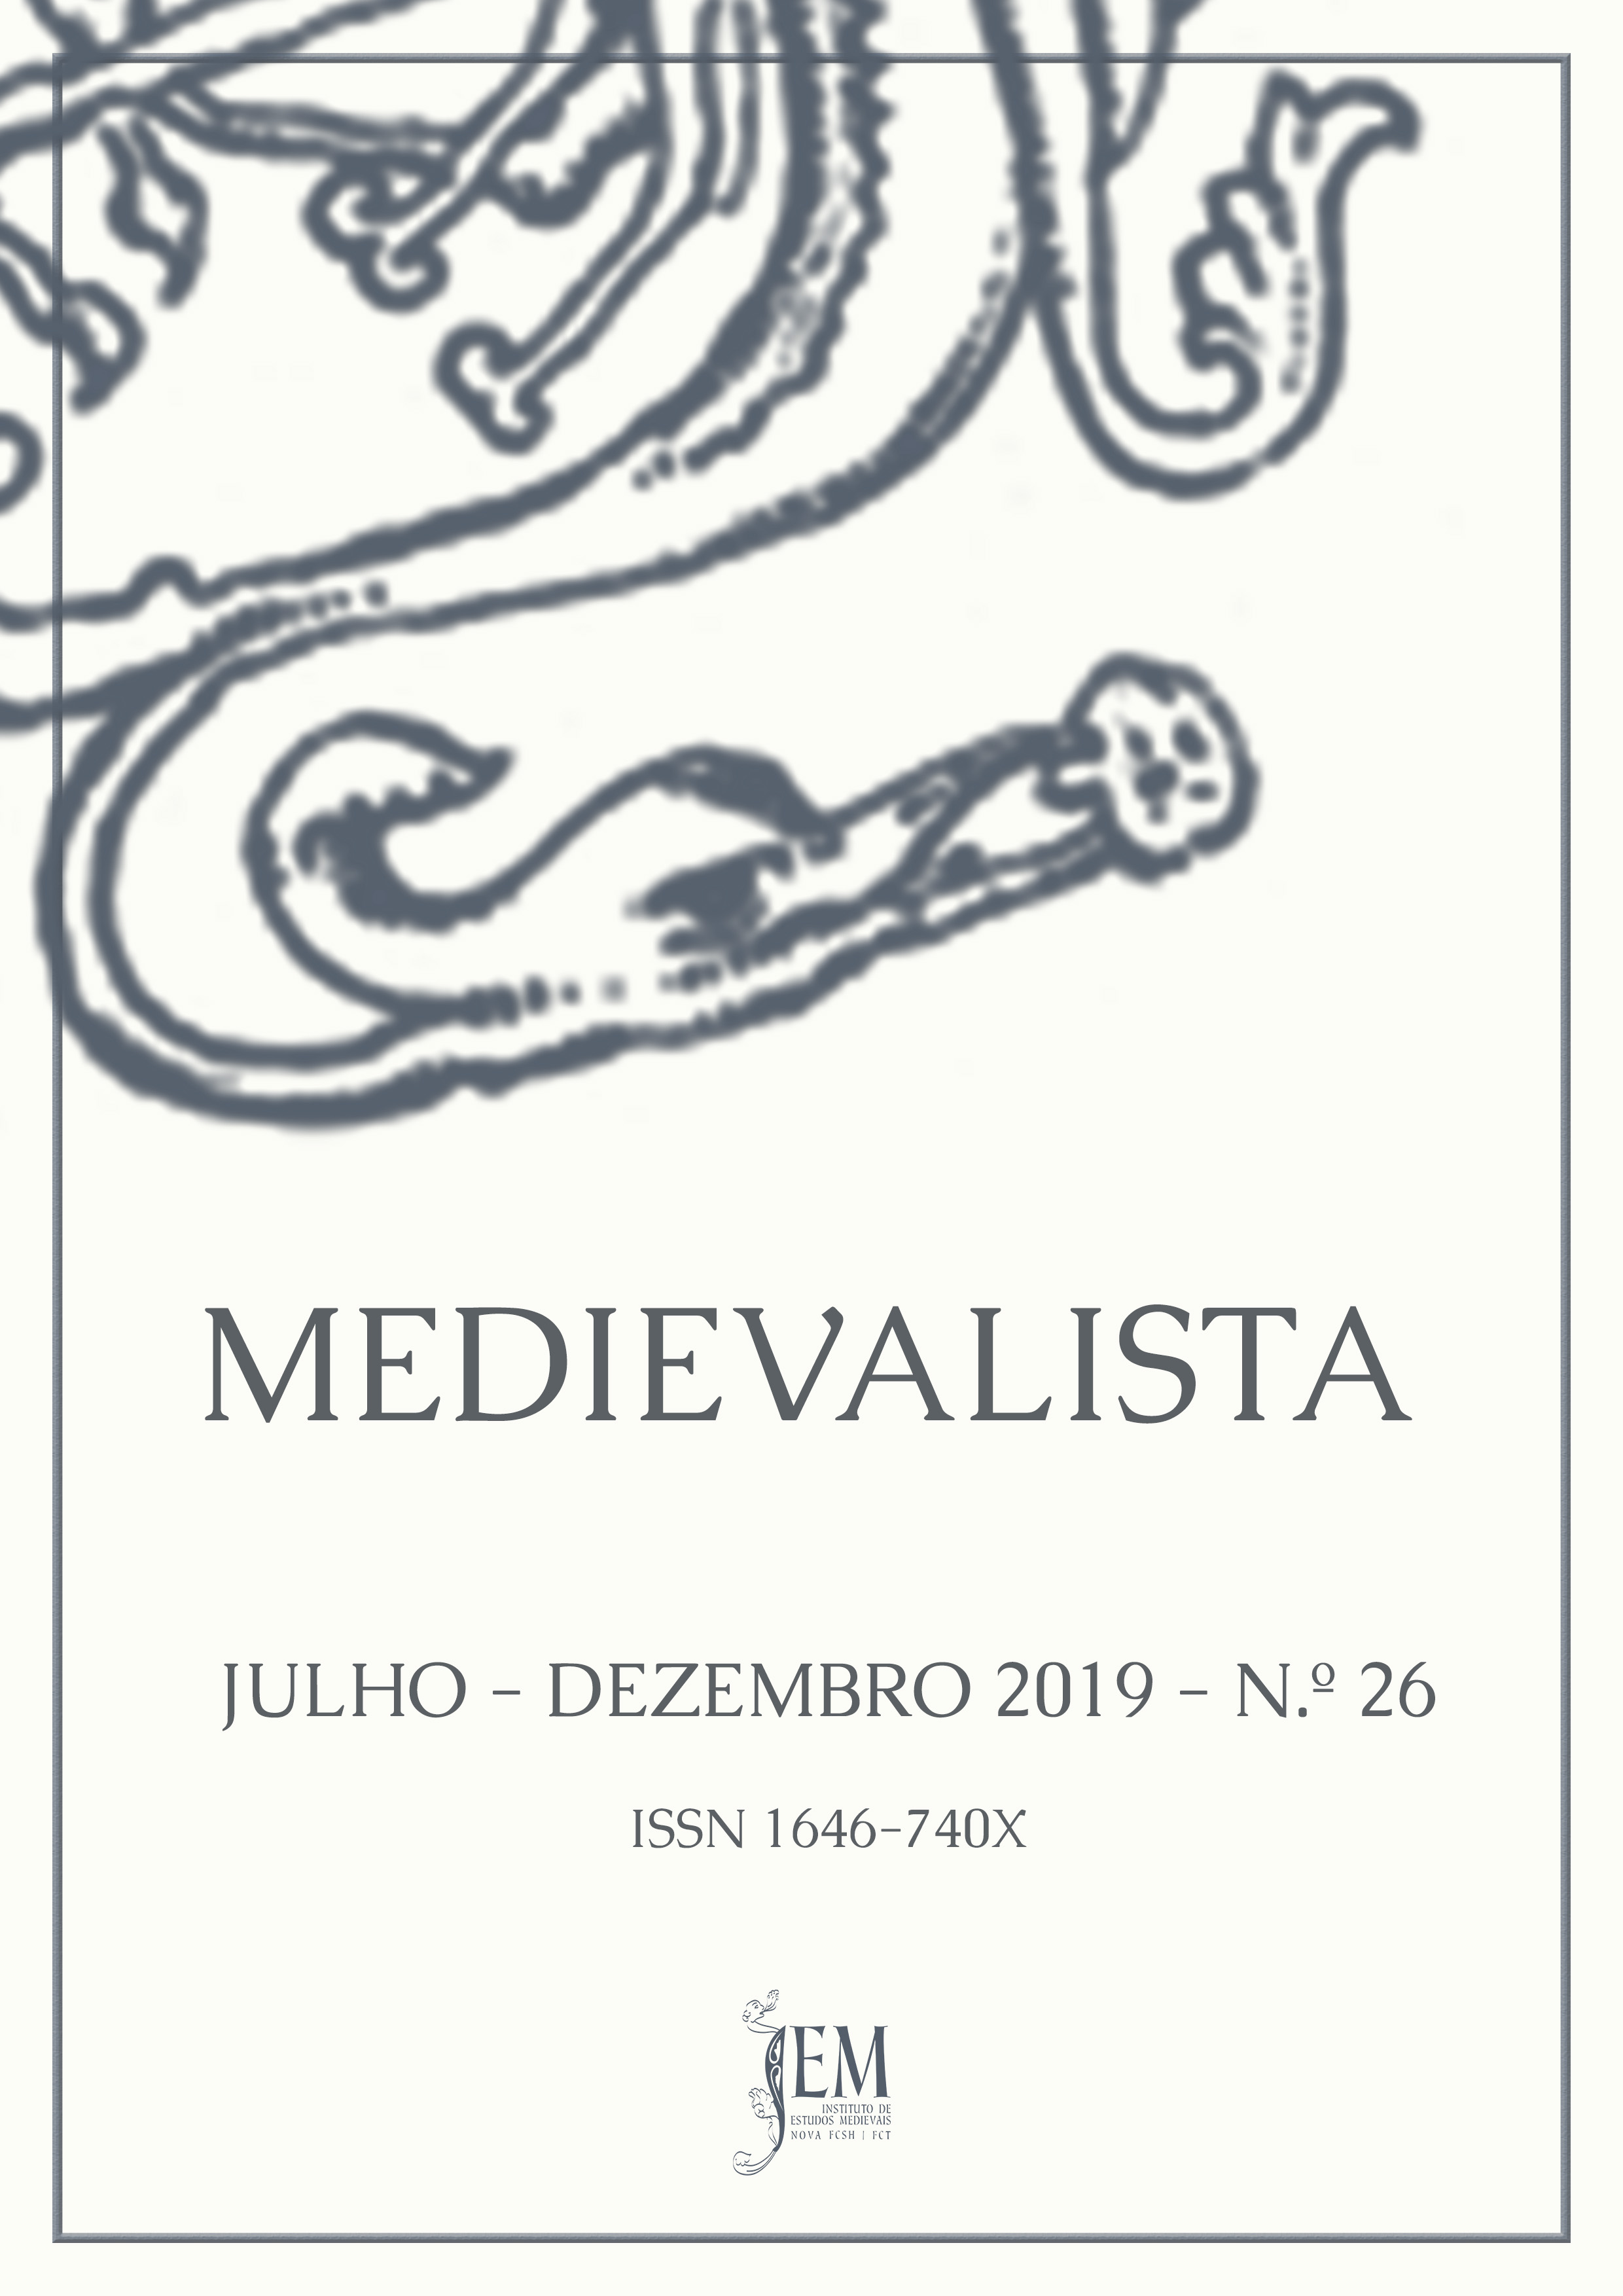 					Ver N.º 26 (2019): Medievalista - Dossier Temático "Medieval Europe in Motion. The Middle Ages: a Global Context”
				